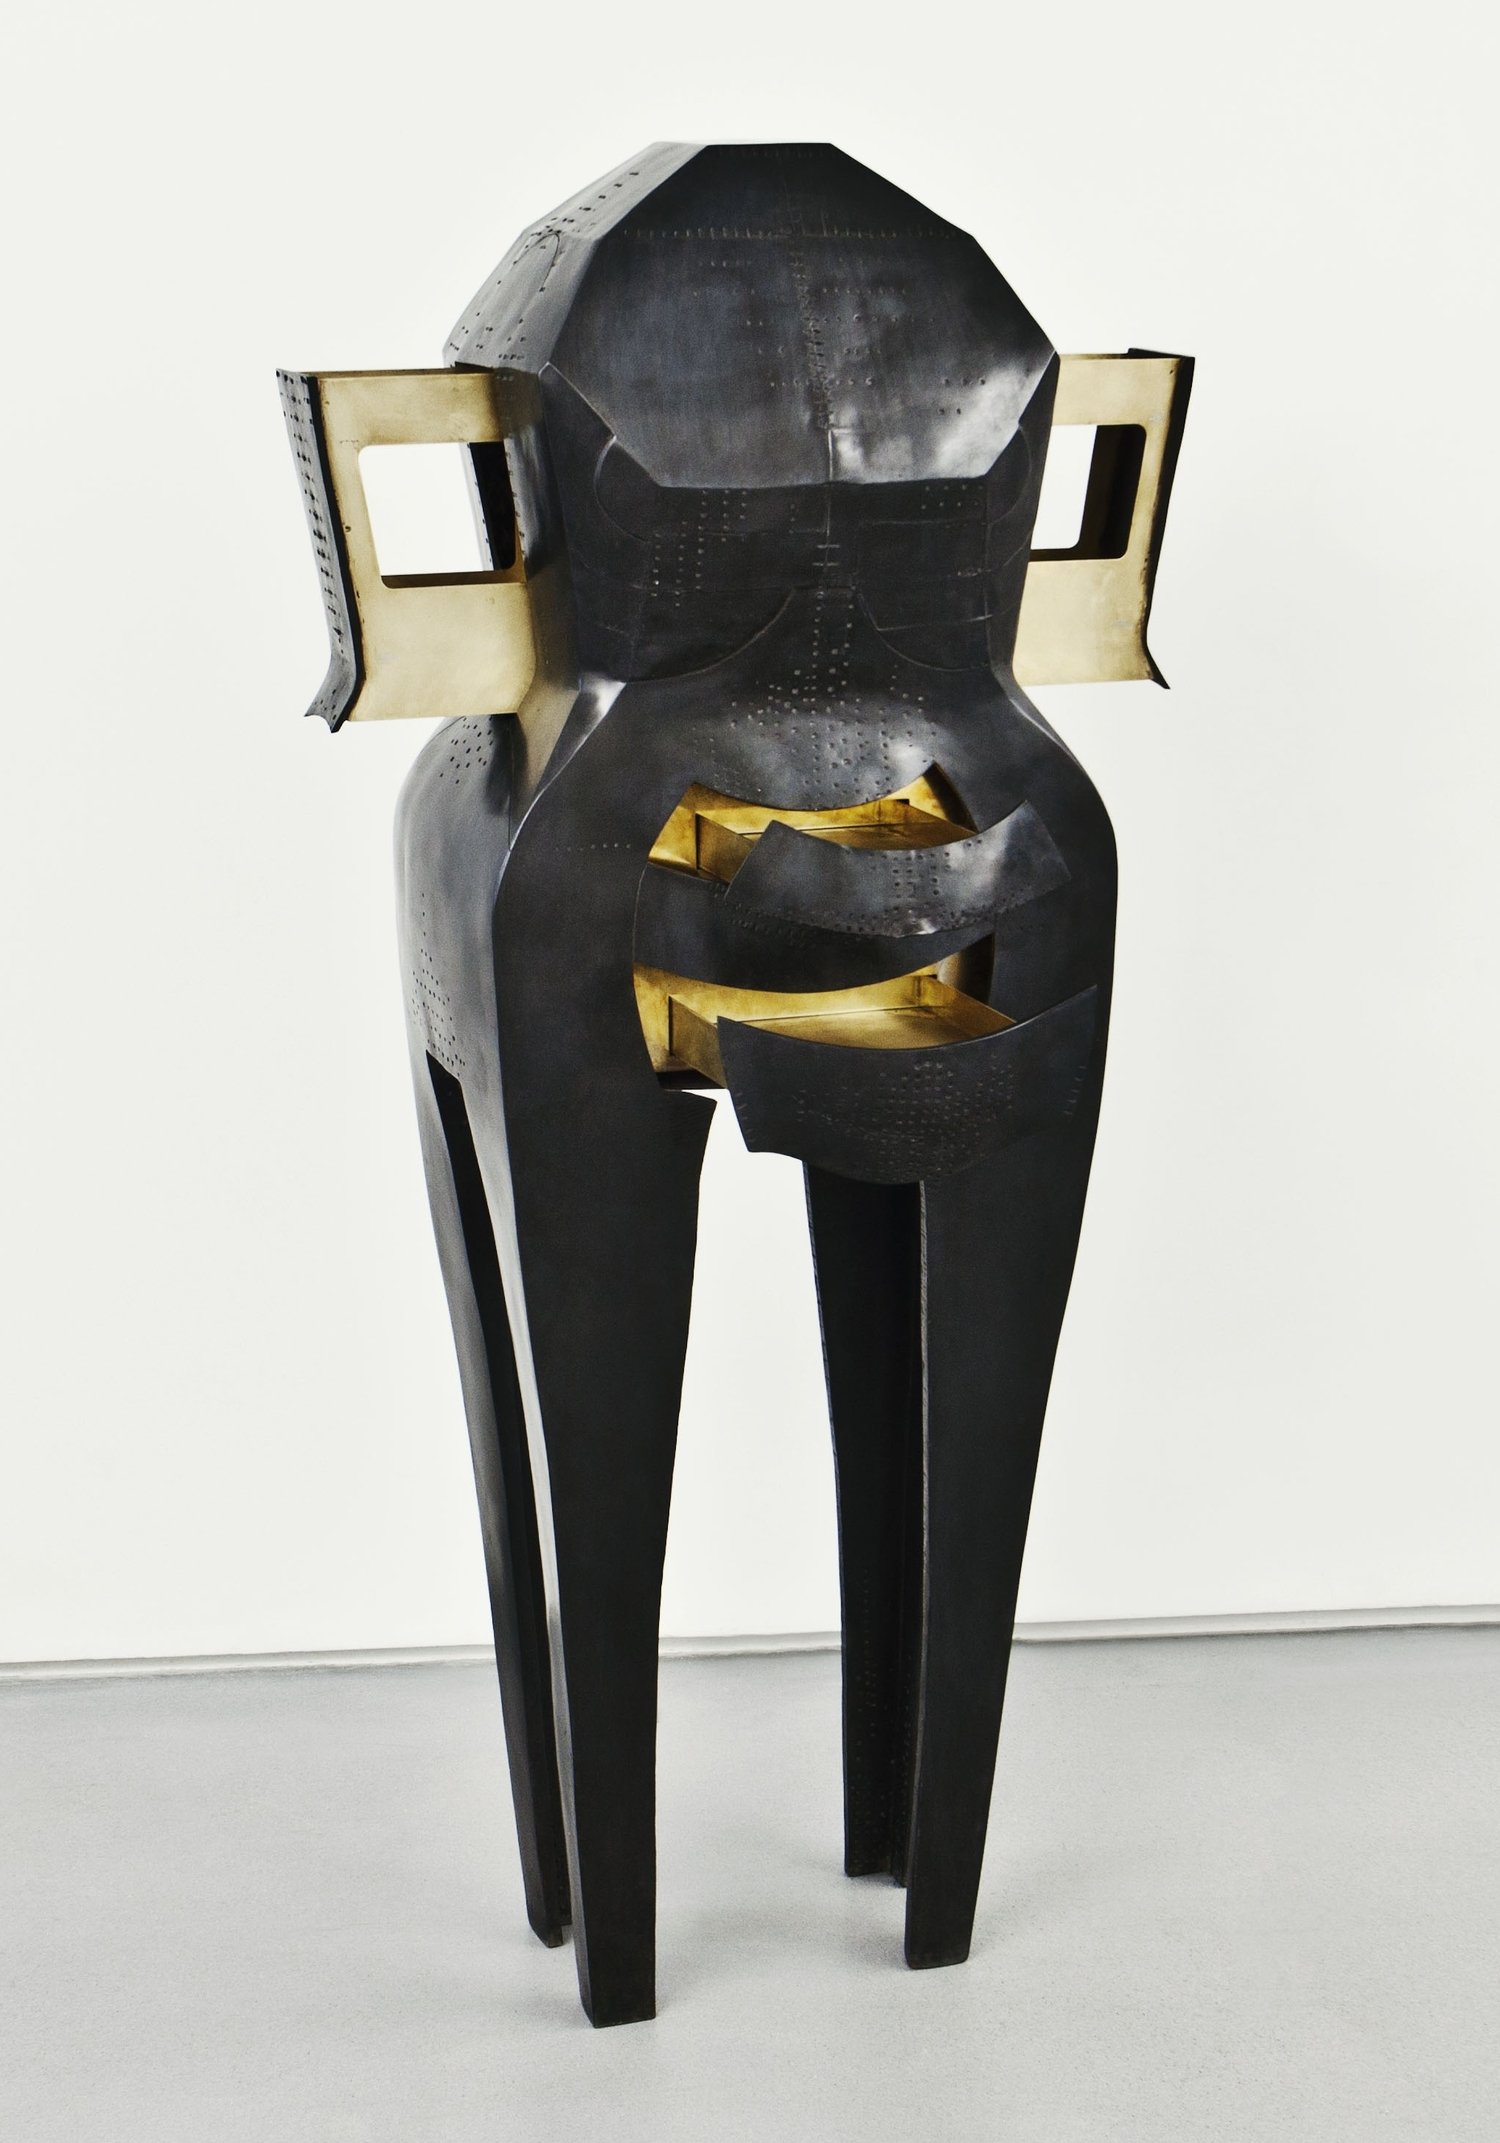  Ingrid Donat  HOMMAGE A GROULT , 2011 Bronze 65.7 x 15.7 x 20.9 in. Limited edition of 8 + 4 ap 